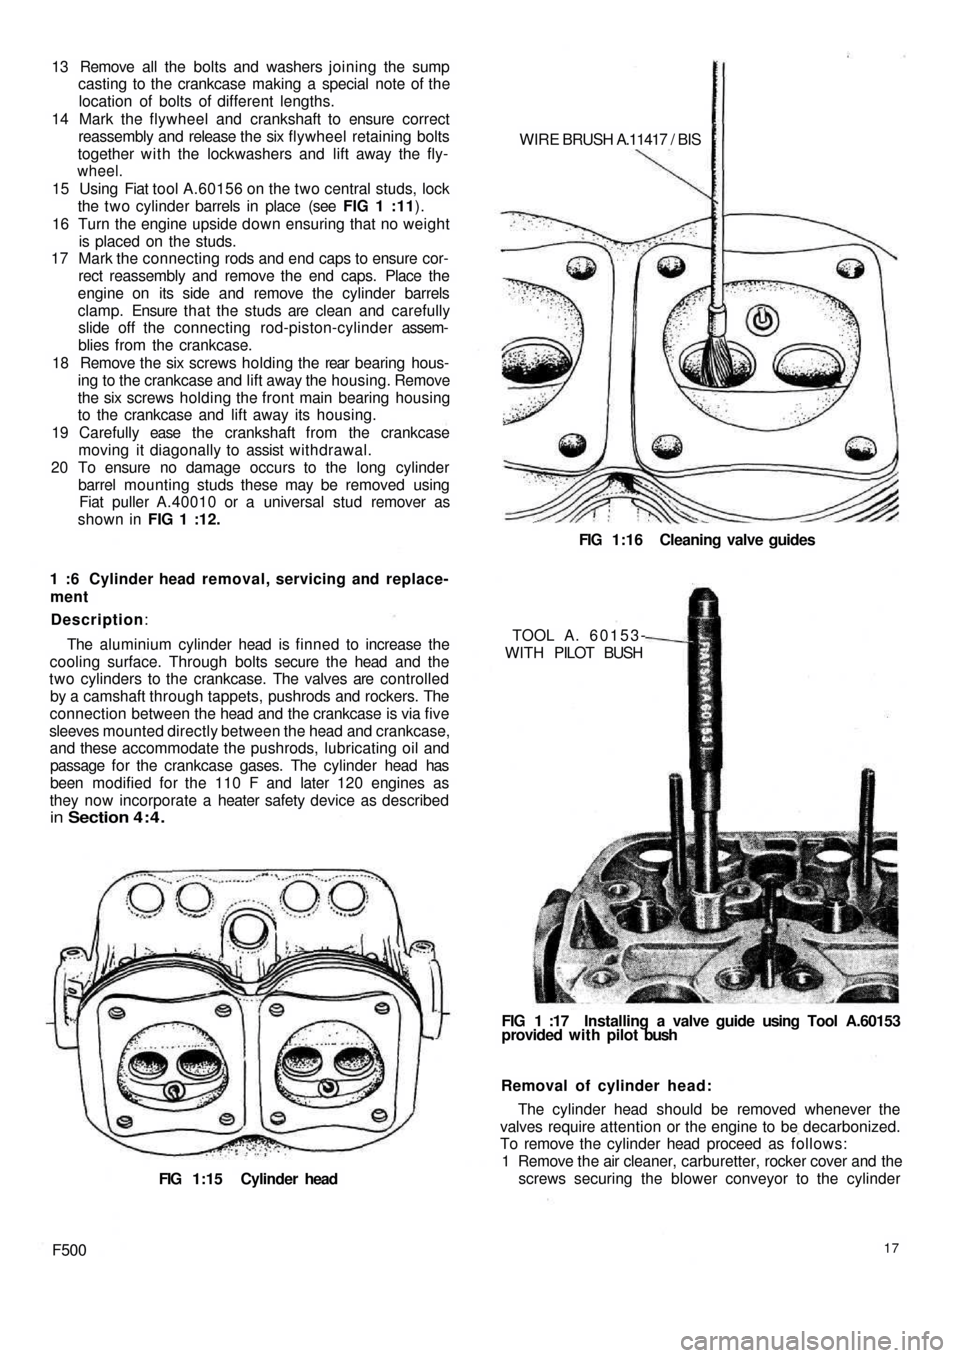 FIAT 500 1957 1.G Workshop Manual 13  Remove all the bolts and washers joining the sump
casting to the crankcase making a special note of the
location of bolts of different lengths.
14 Mark the flywheel and crankshaft to ensure correc